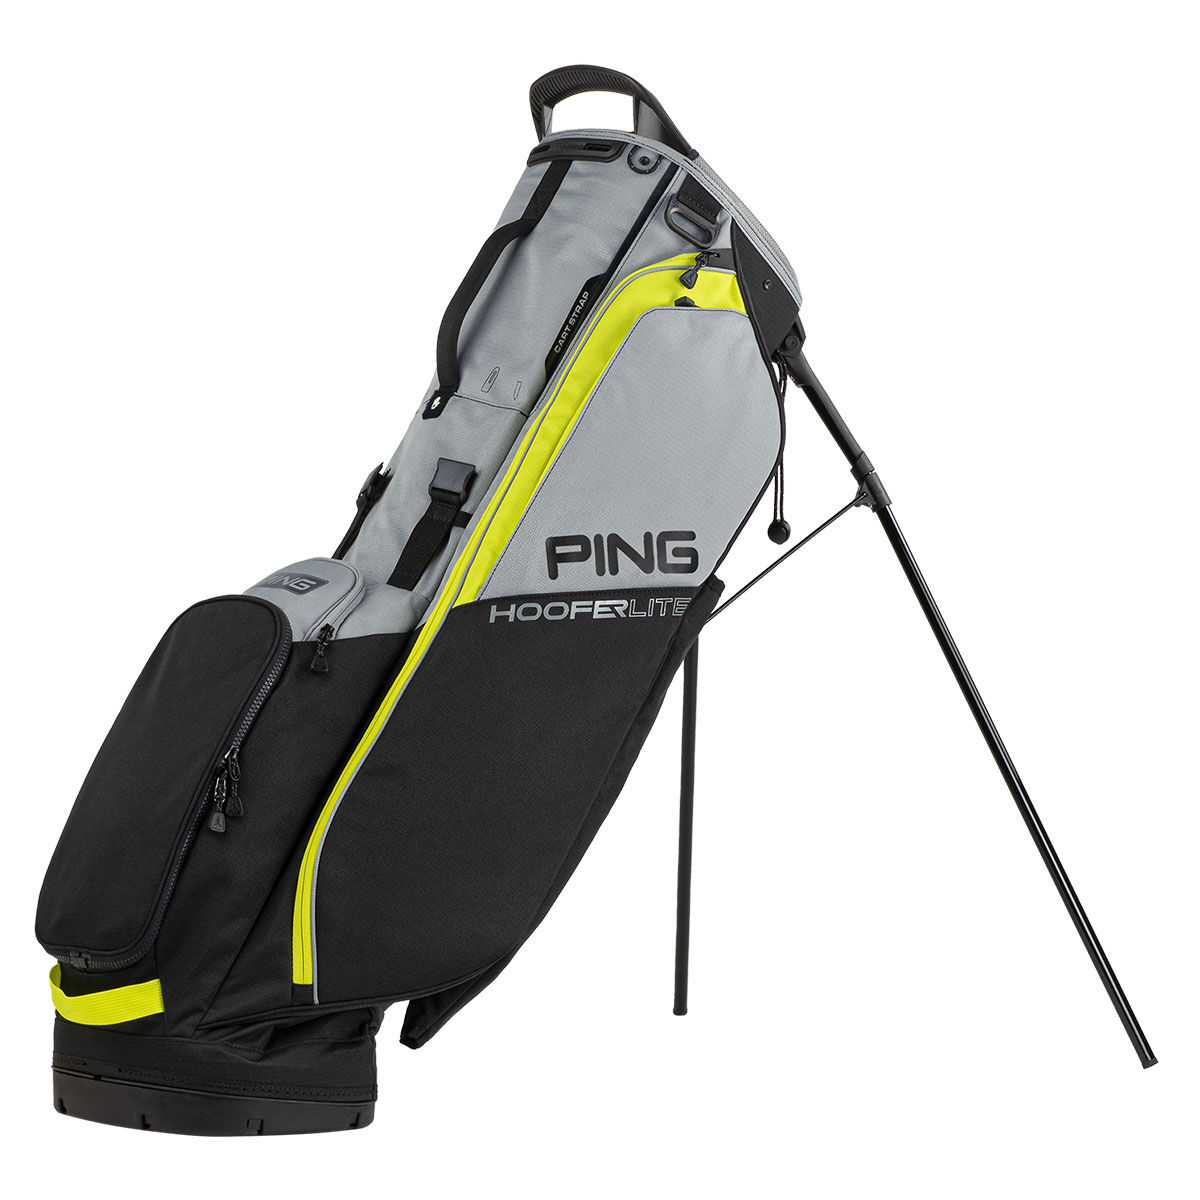 PING Hoofer Lite 231 Golf Stand Bag, Black/iron/neon yellow, One Size | American Golf